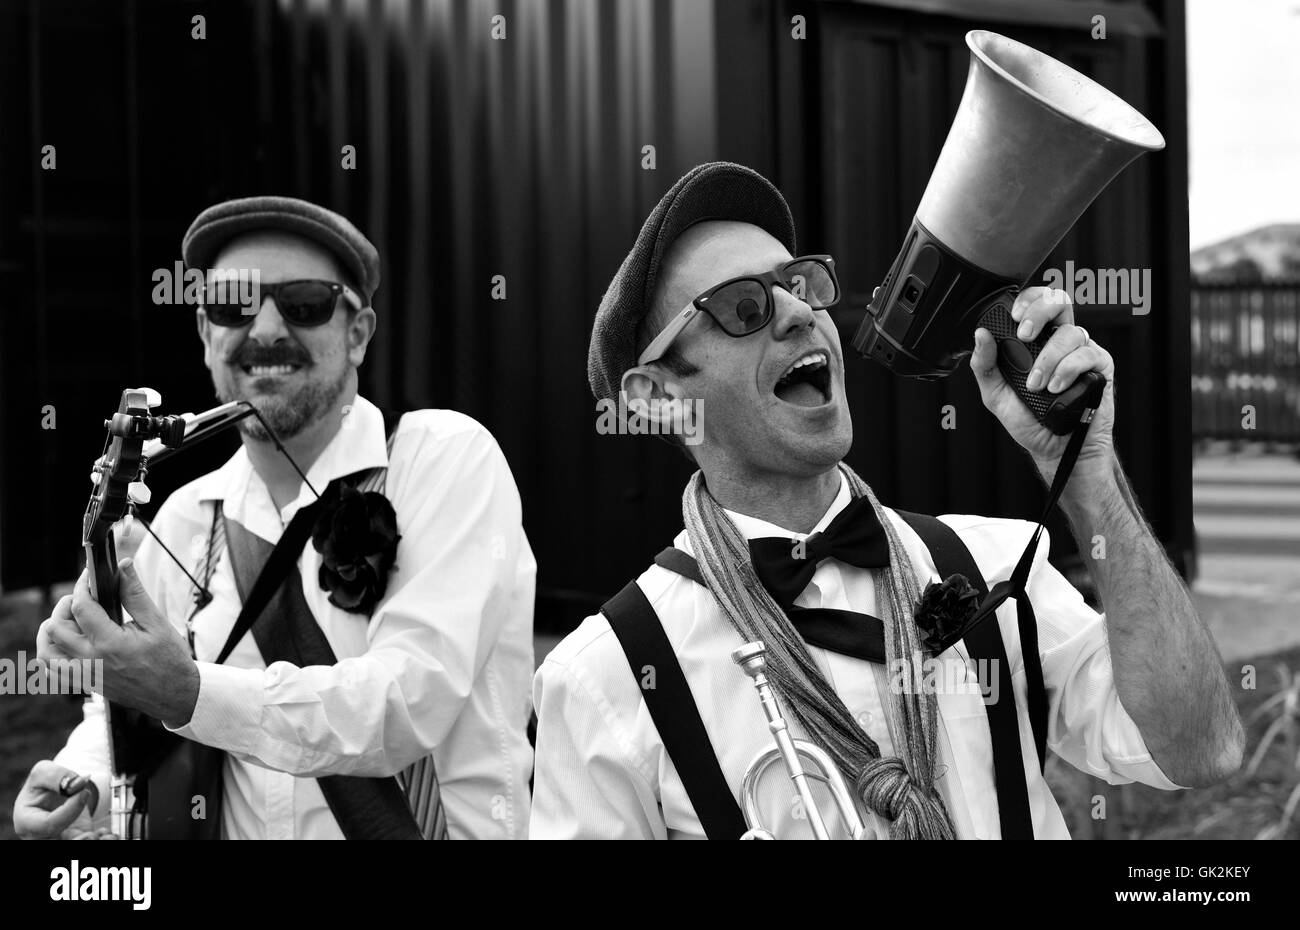 Street Performers, buskers, musicians lauging and putting on a show with megaphone, banjo player, dixie two men Stock Photo